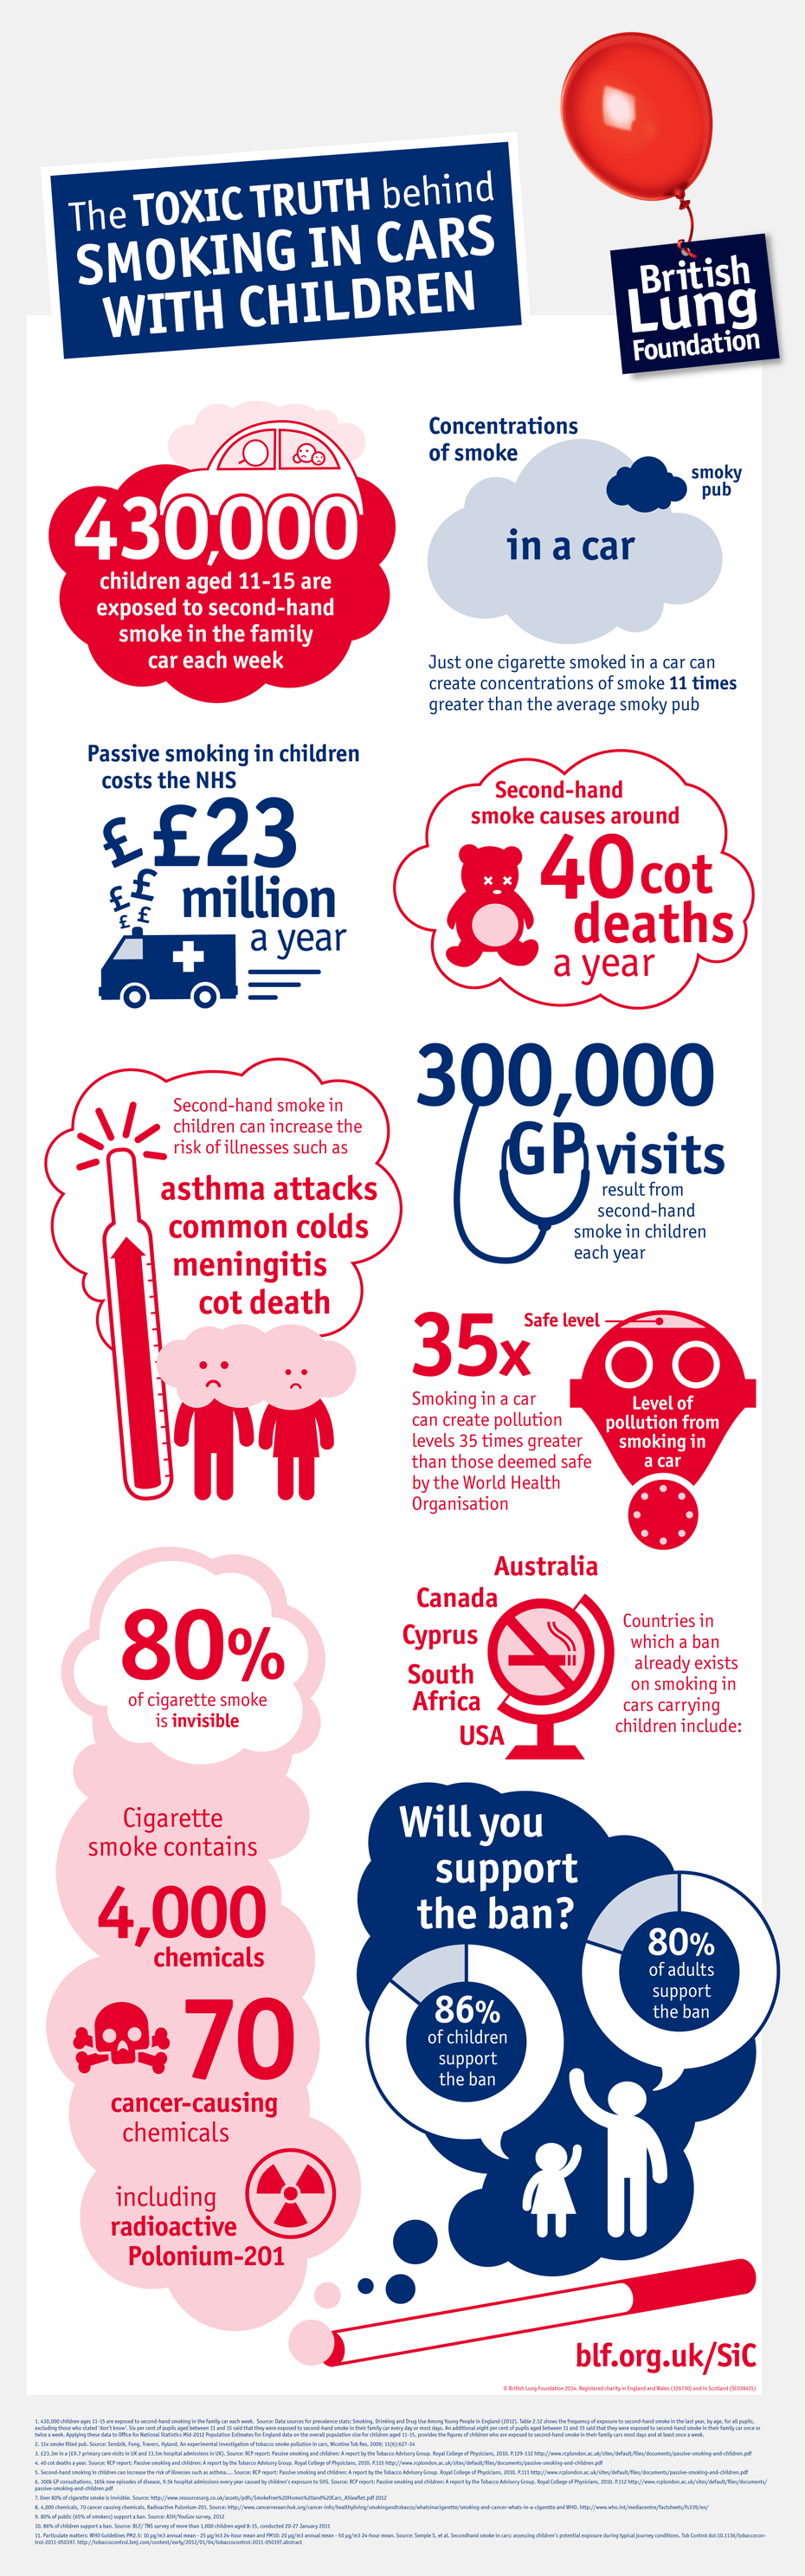 Smoking in cars campaign infographic